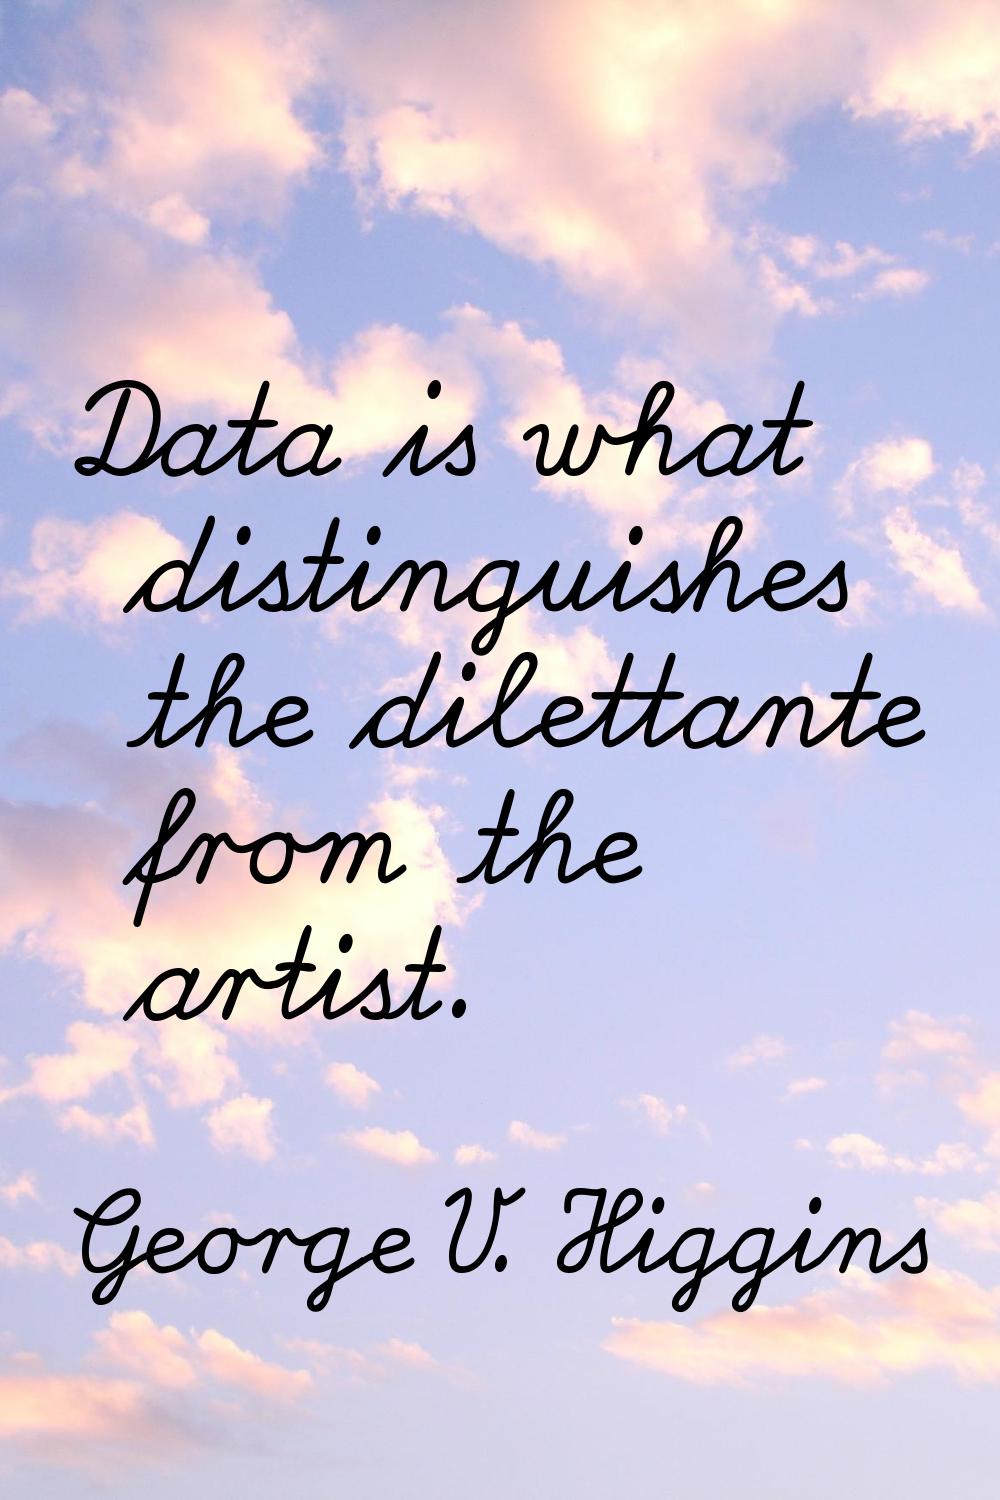 Data is what distinguishes the dilettante from the artist.